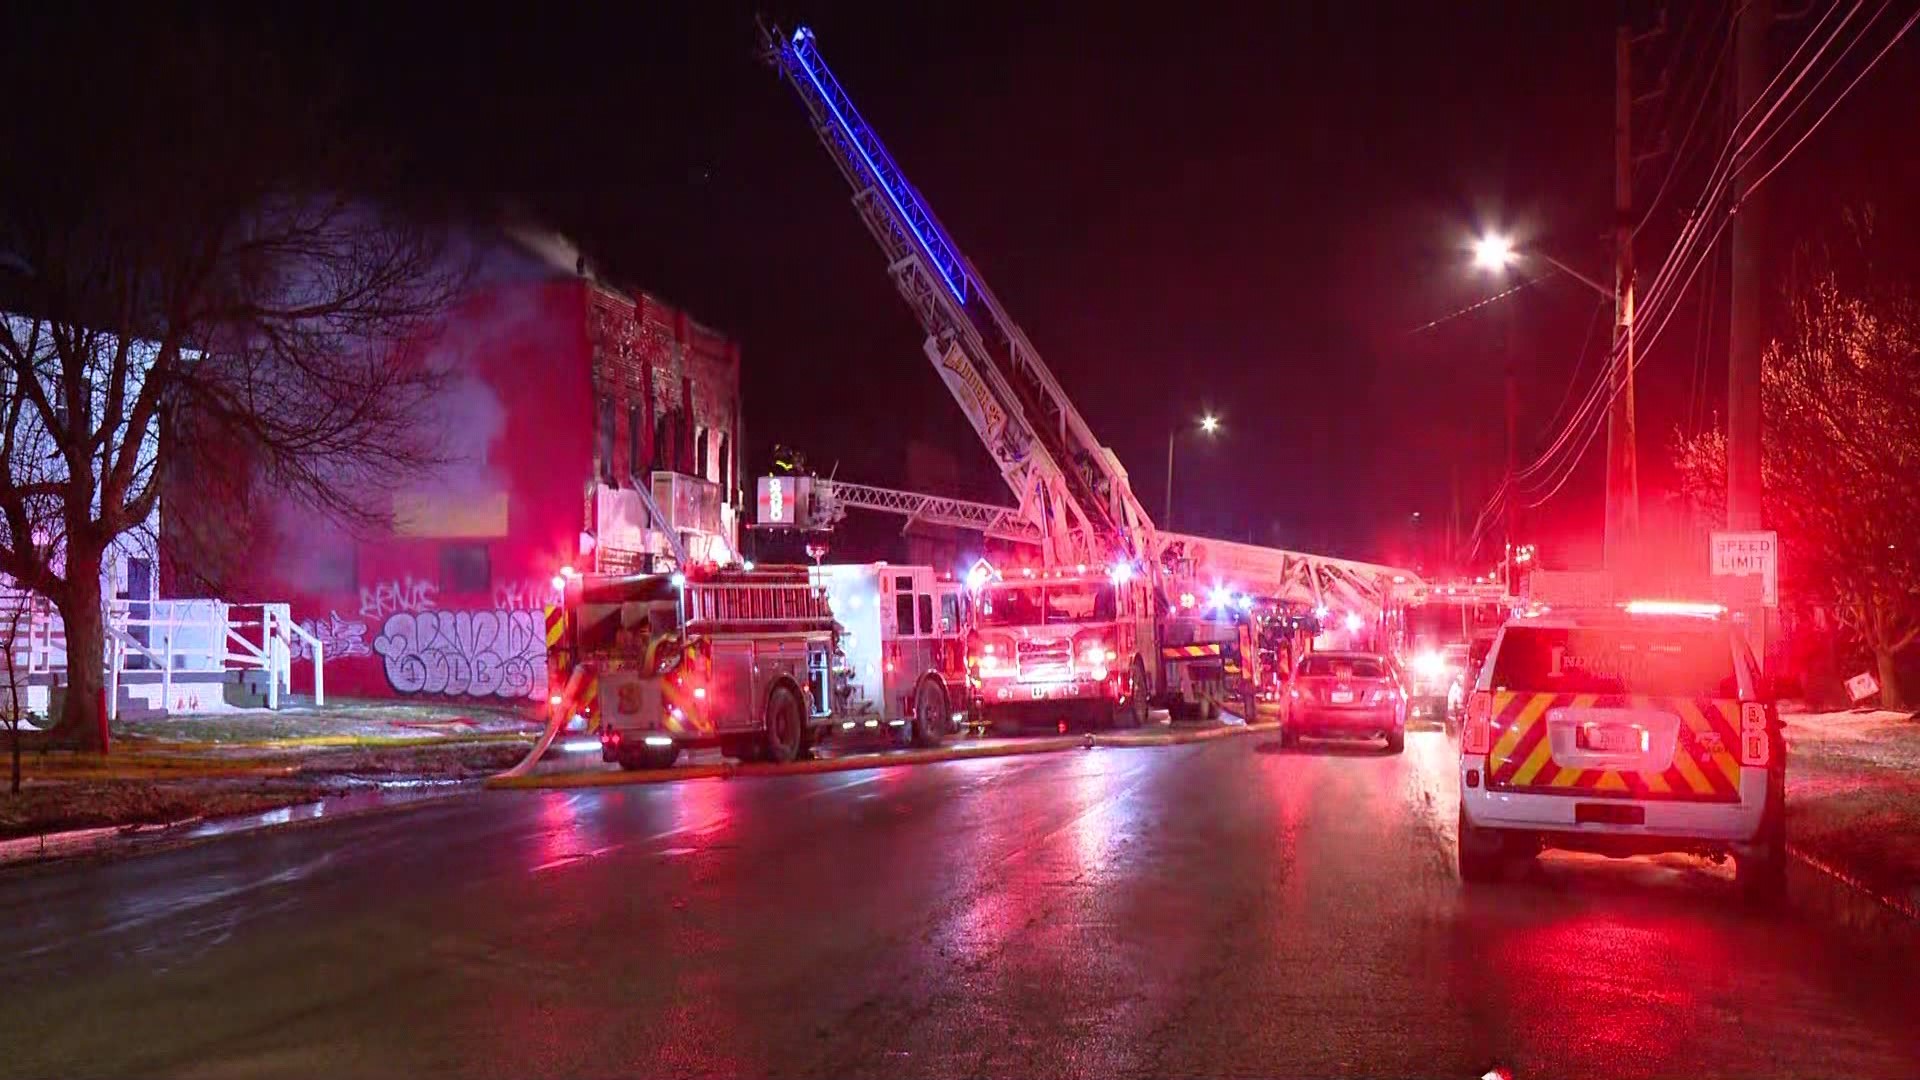 The fire occurred at a vacant building in the 2400 block of East Washington Street. No injuries were reported, IFD said.